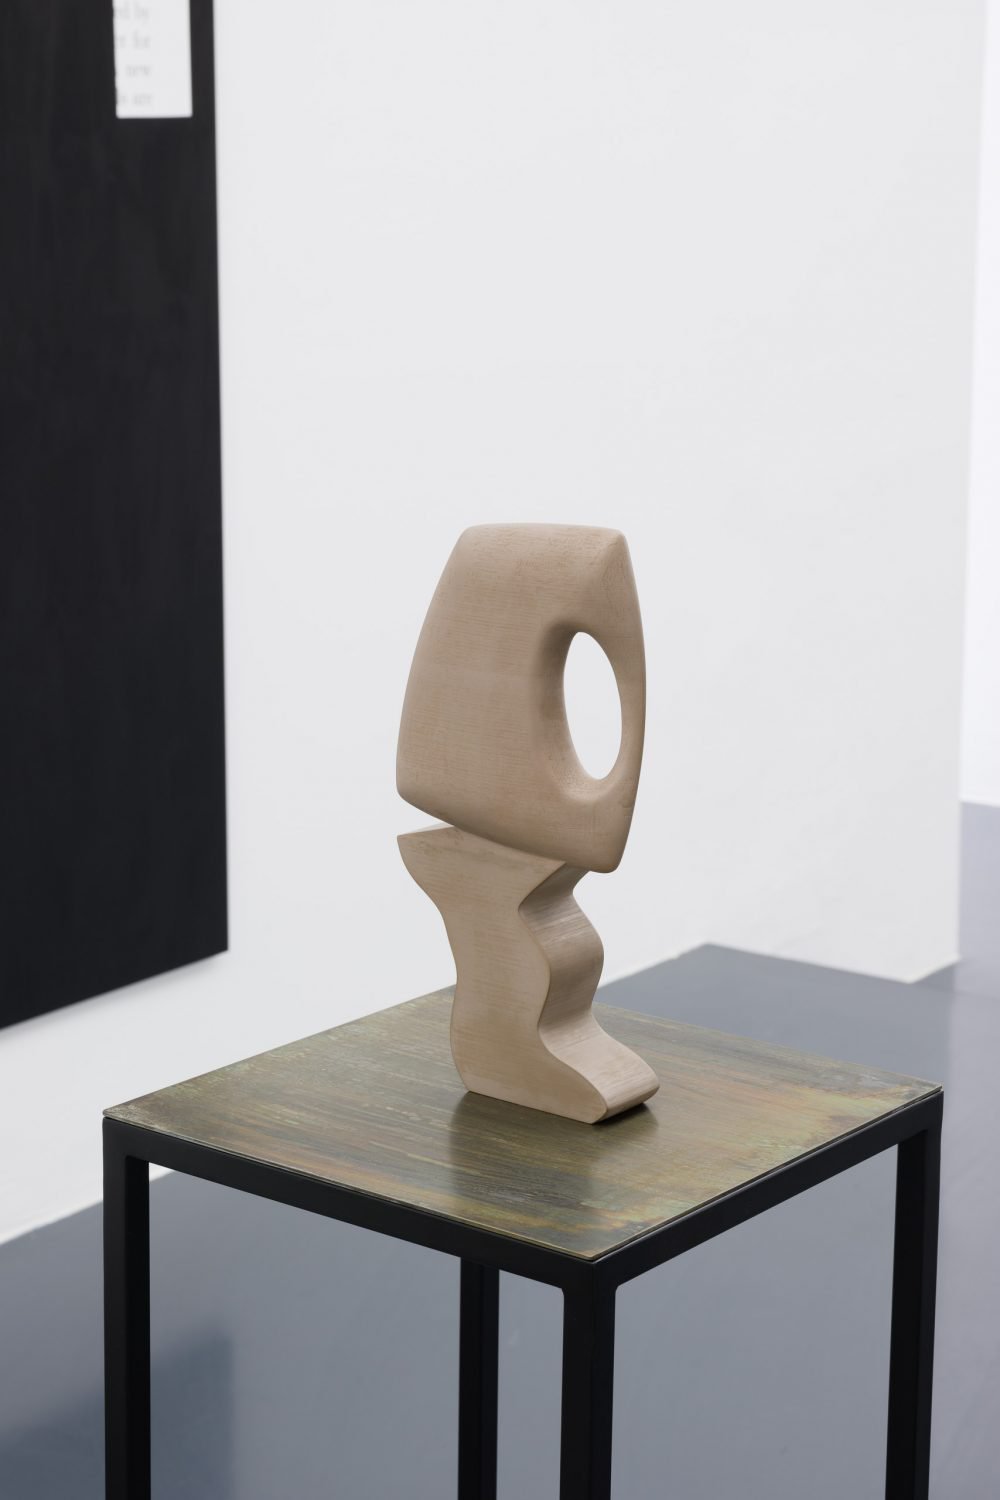 Andy Boot, Smart Sculpture (one)3D printed plastic and bronze composite34.6 x 7.7 x 17.3 cm